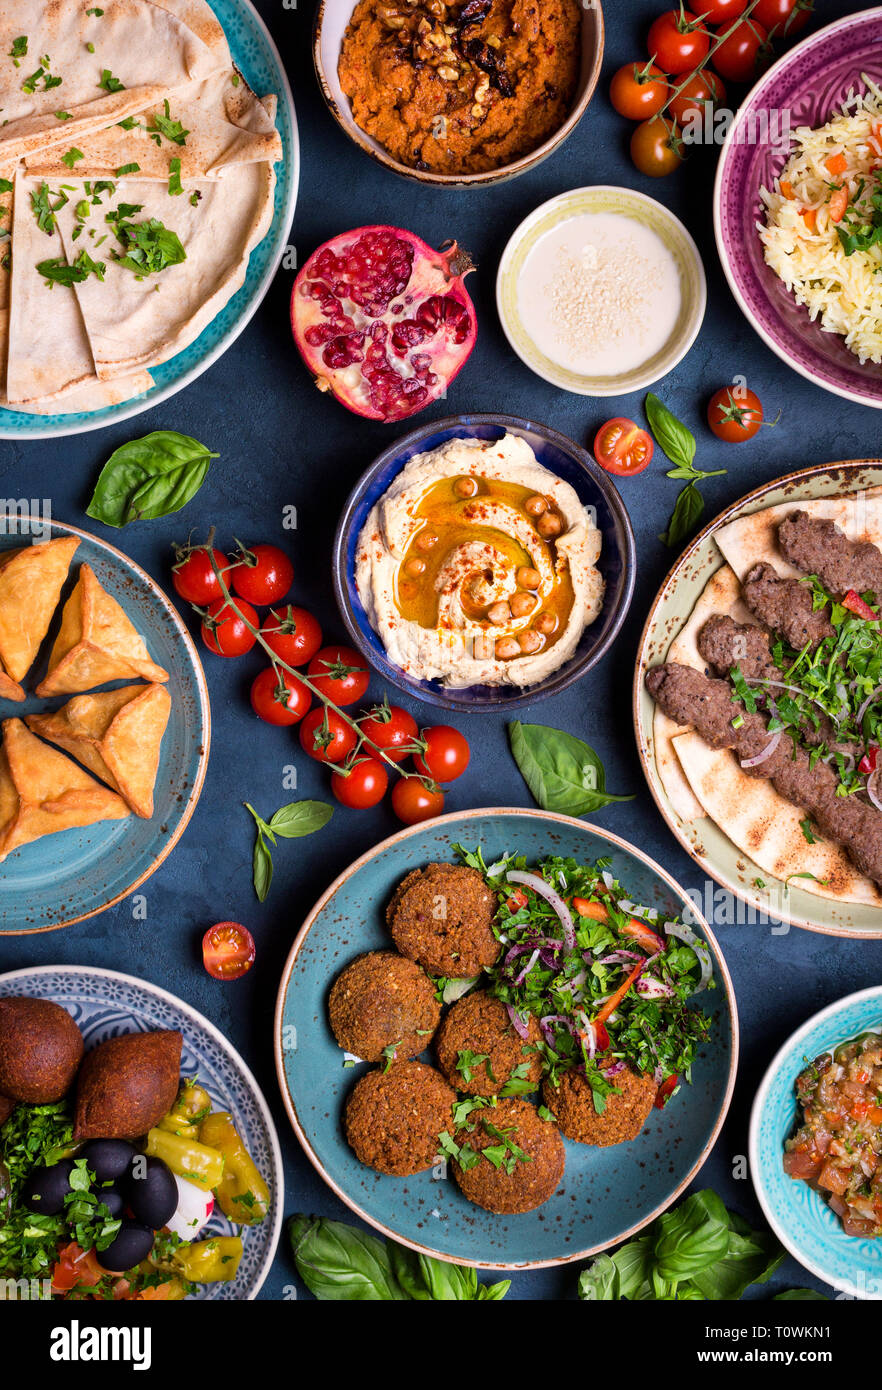 Arabic dishes and meze Stock Photo: 241509437 - Alamy